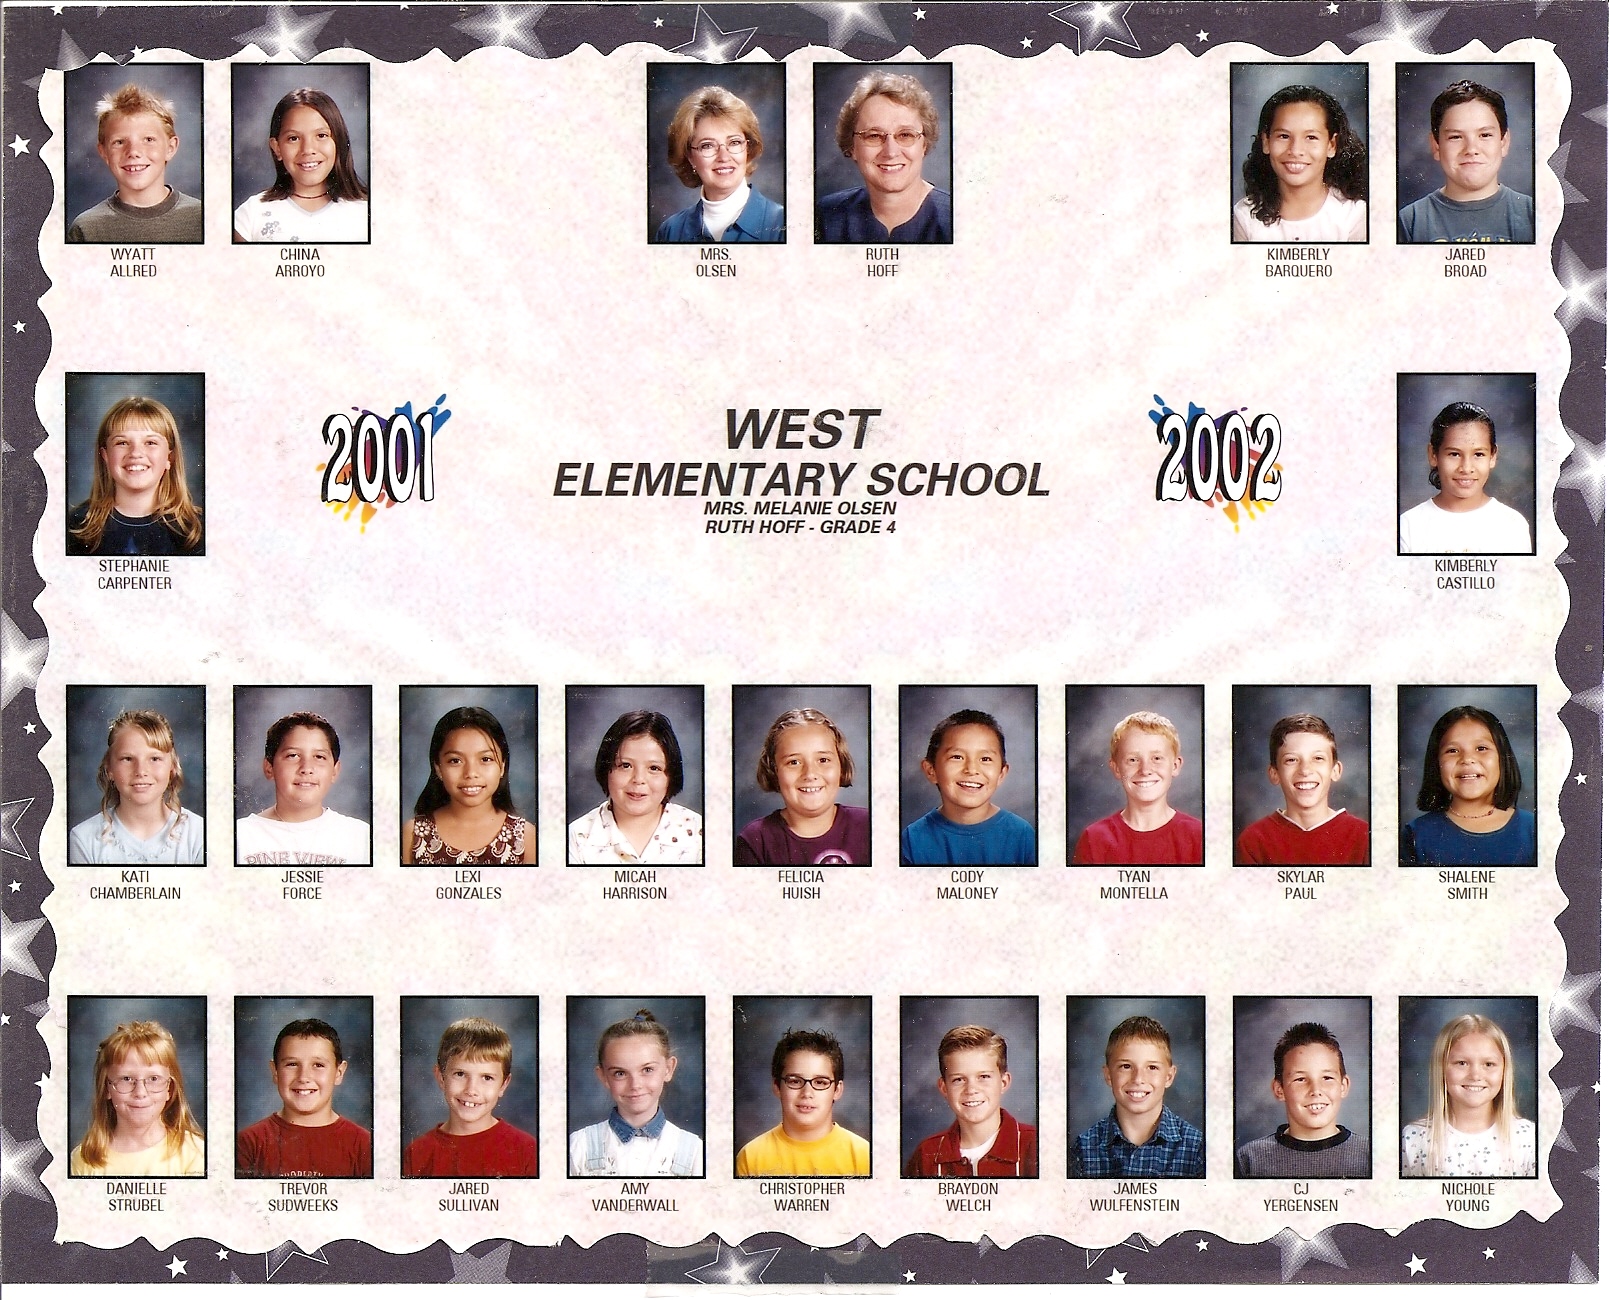 Mrs. Ruth Hoff's 2001-2002 fourth grade class at West Elementary School